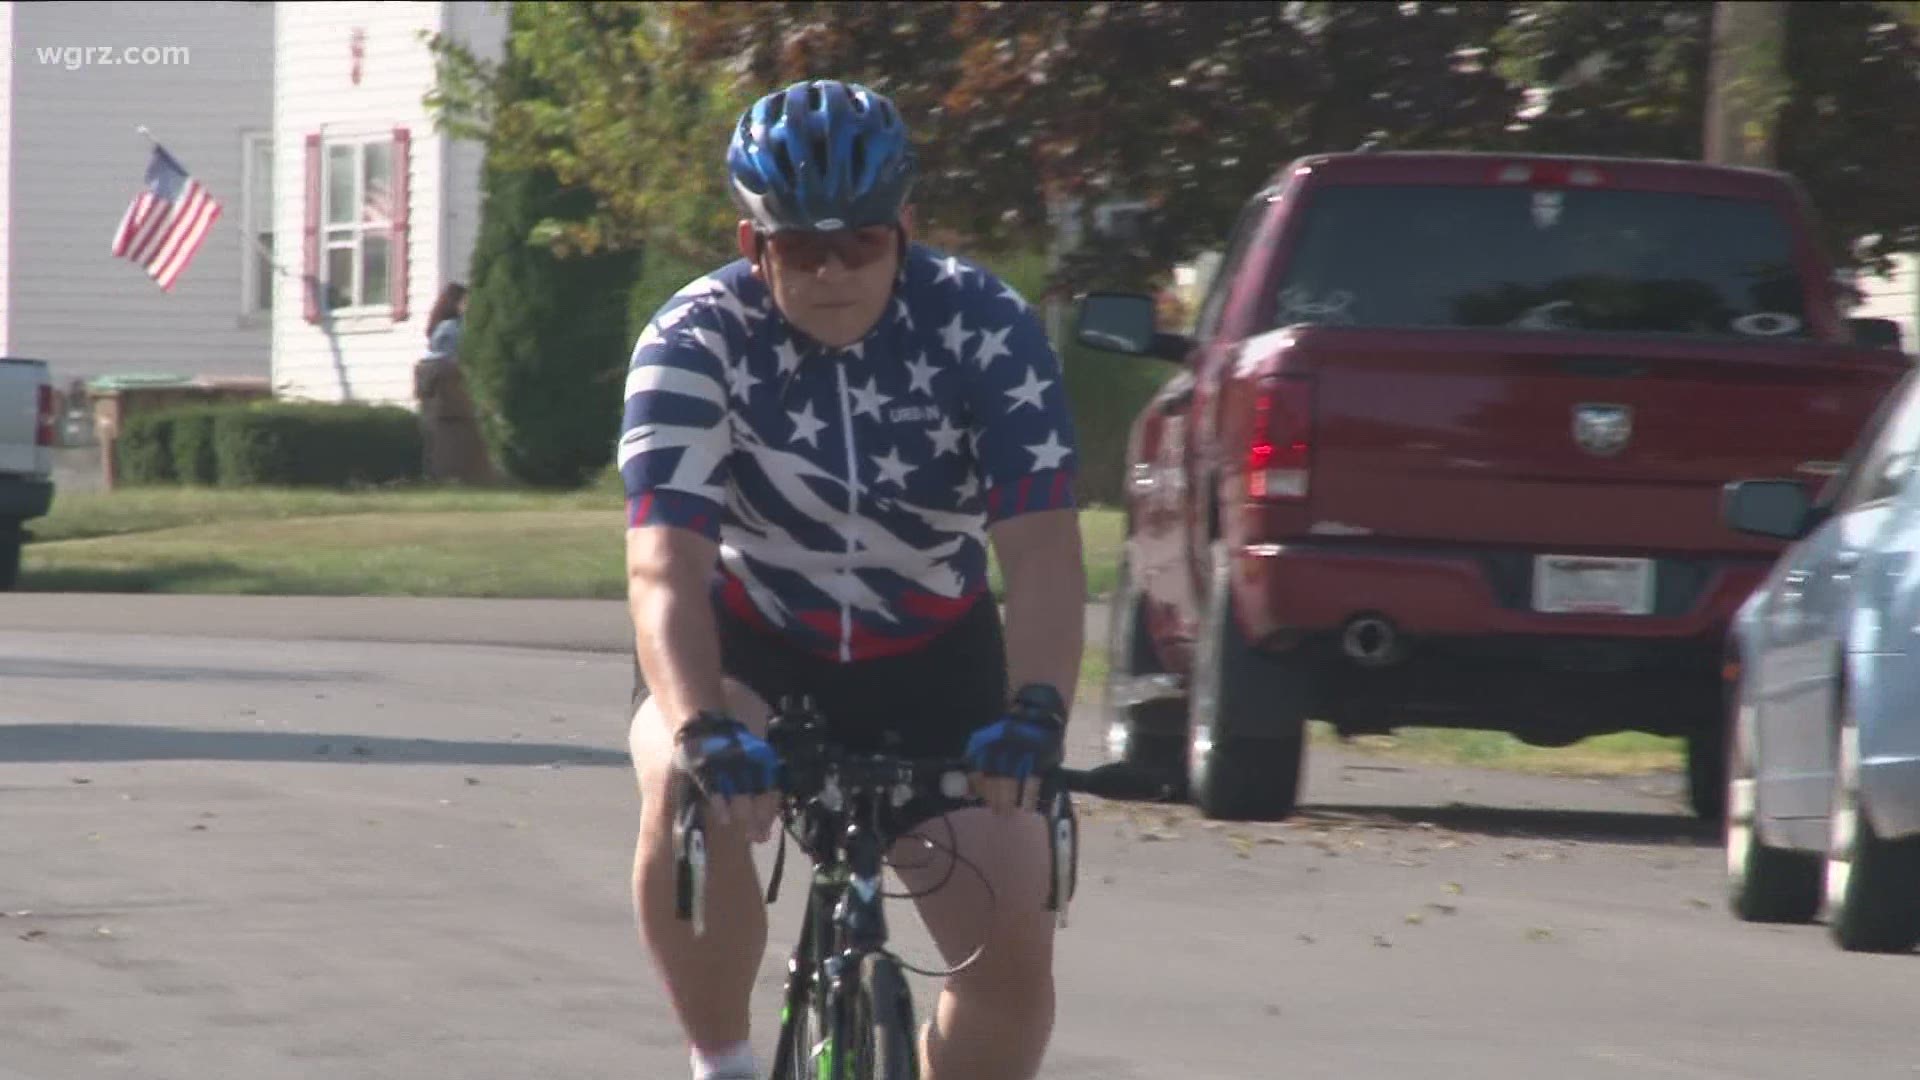 Jason Ettinger is doing his big ride Sunday morning at dawn. He was diagnosed with Crohn's disease in 1996.